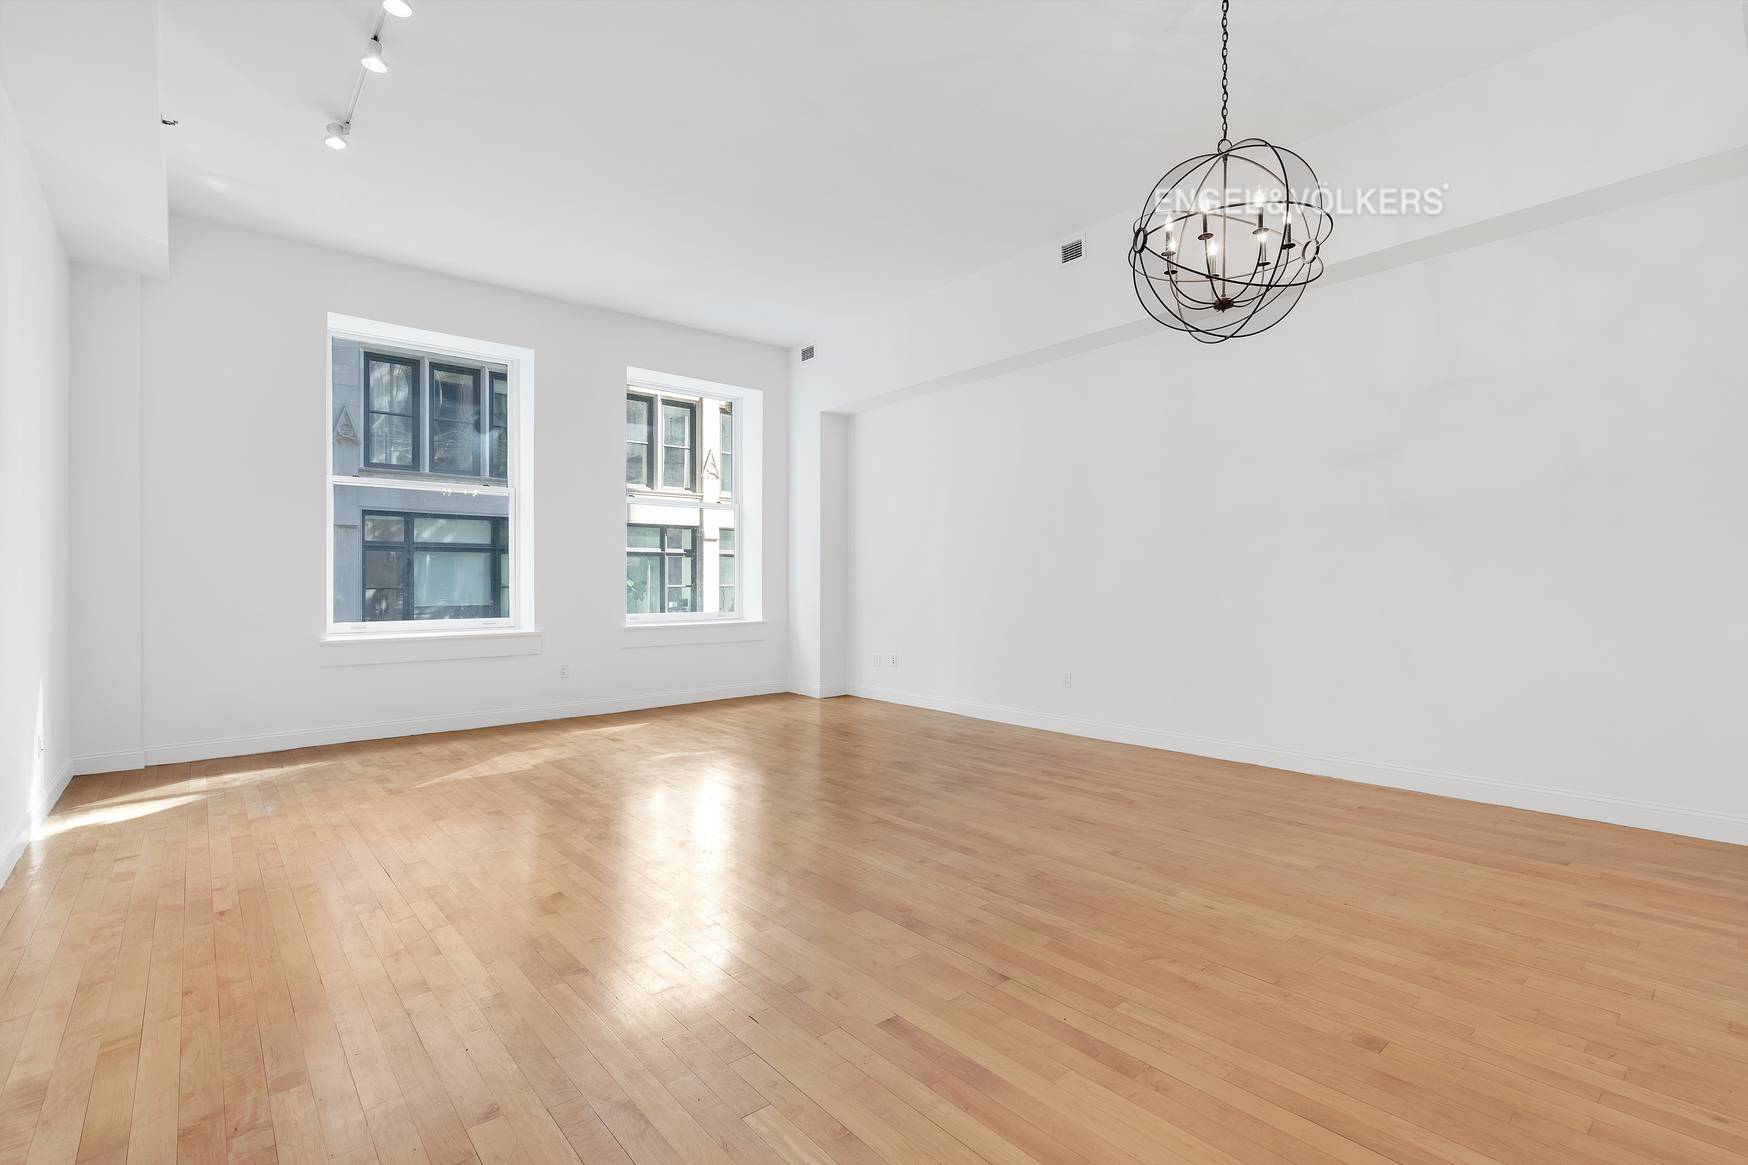 DRAMATIC 2, 555 SF, 3 BEDROOM GRAMERCY FLATIRON LOFT WITH HOME OFFICE DEN This one of a kind home offers soaring 13 foot ceilings and is located in the coveted, ...